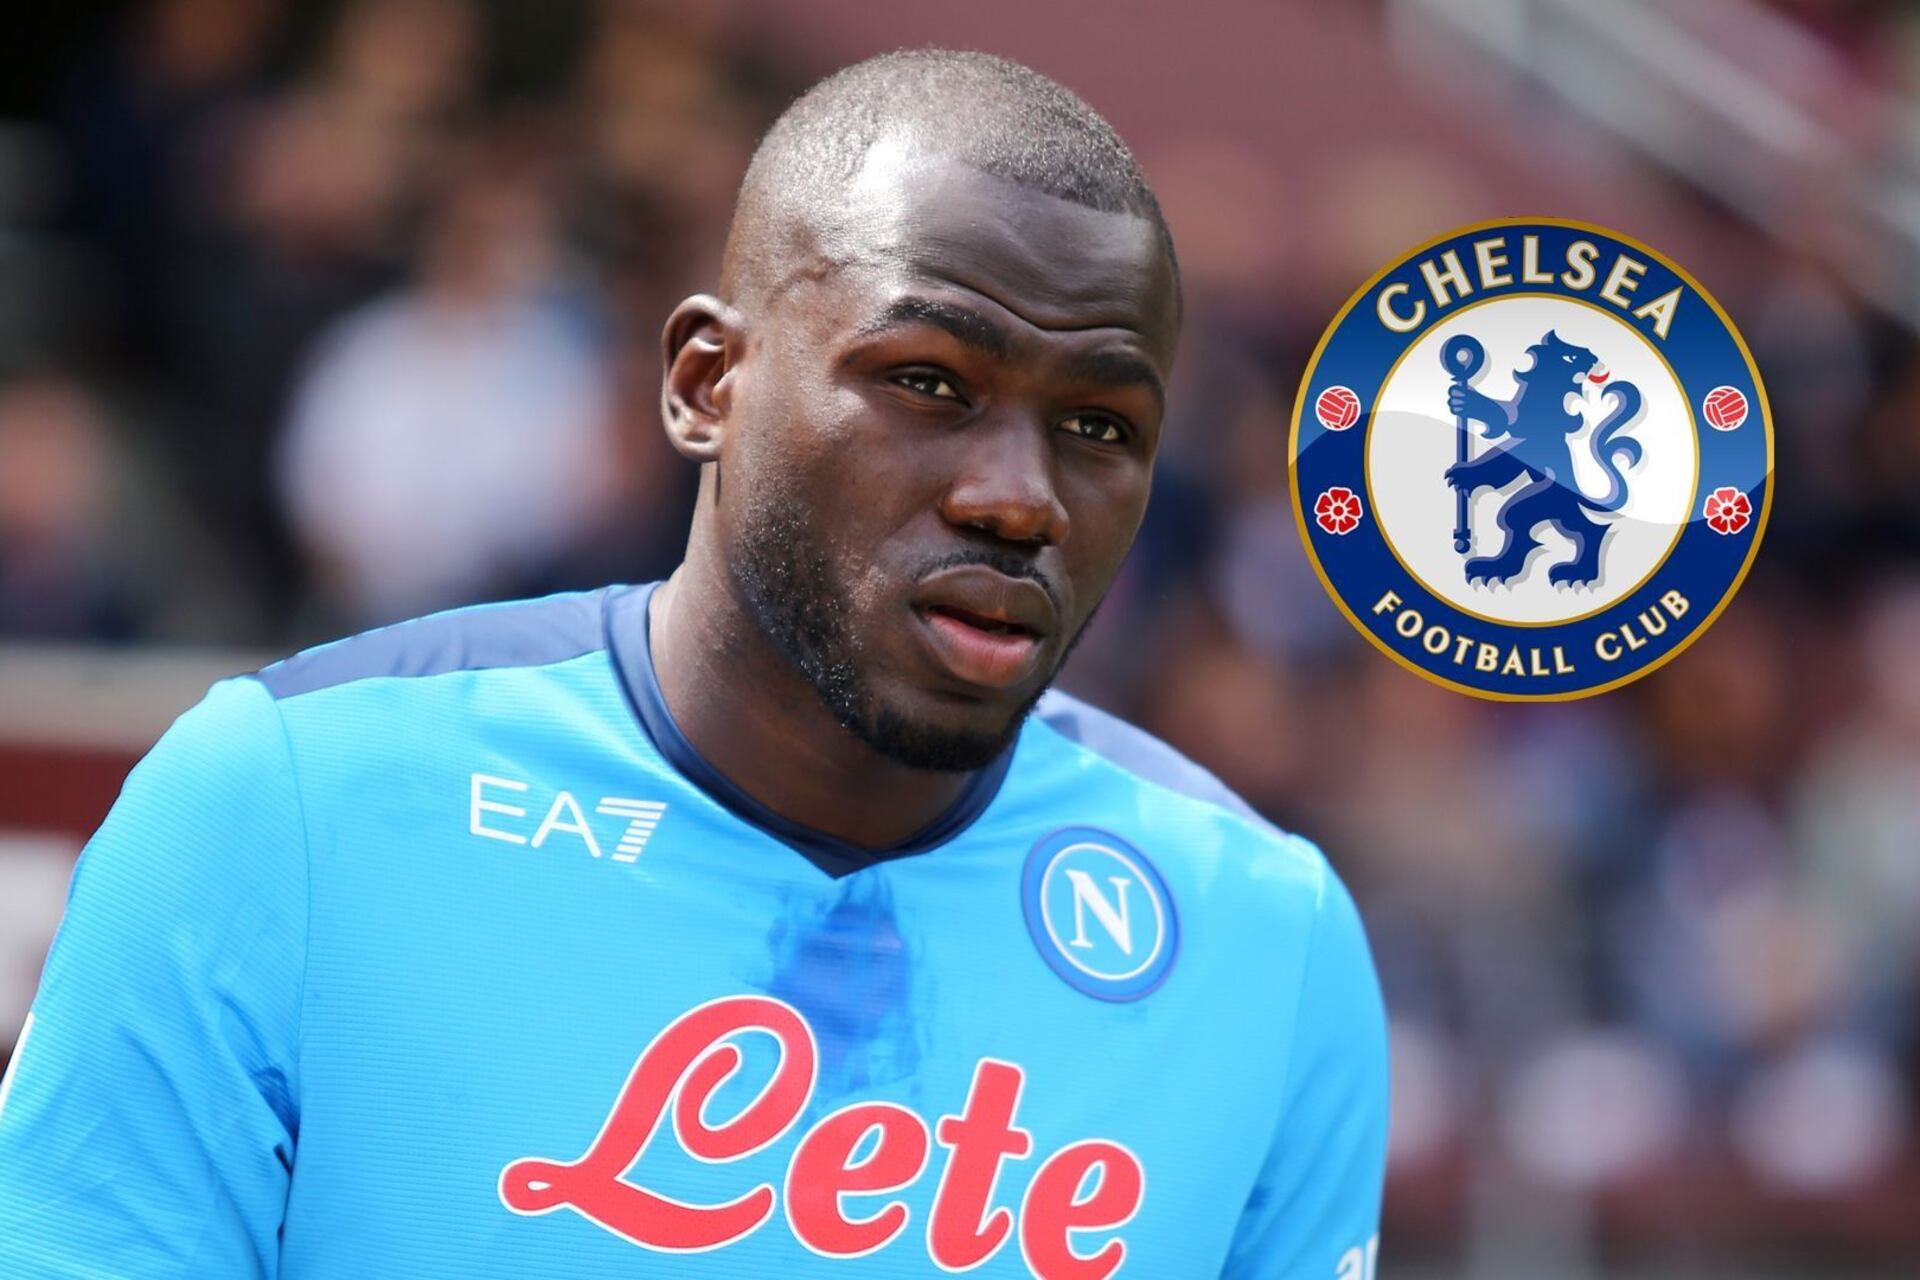 Kalidou Koulibaly arrives in London to join Chelsea, the price the ‘Blues’ will pay for the defensive reinforcement